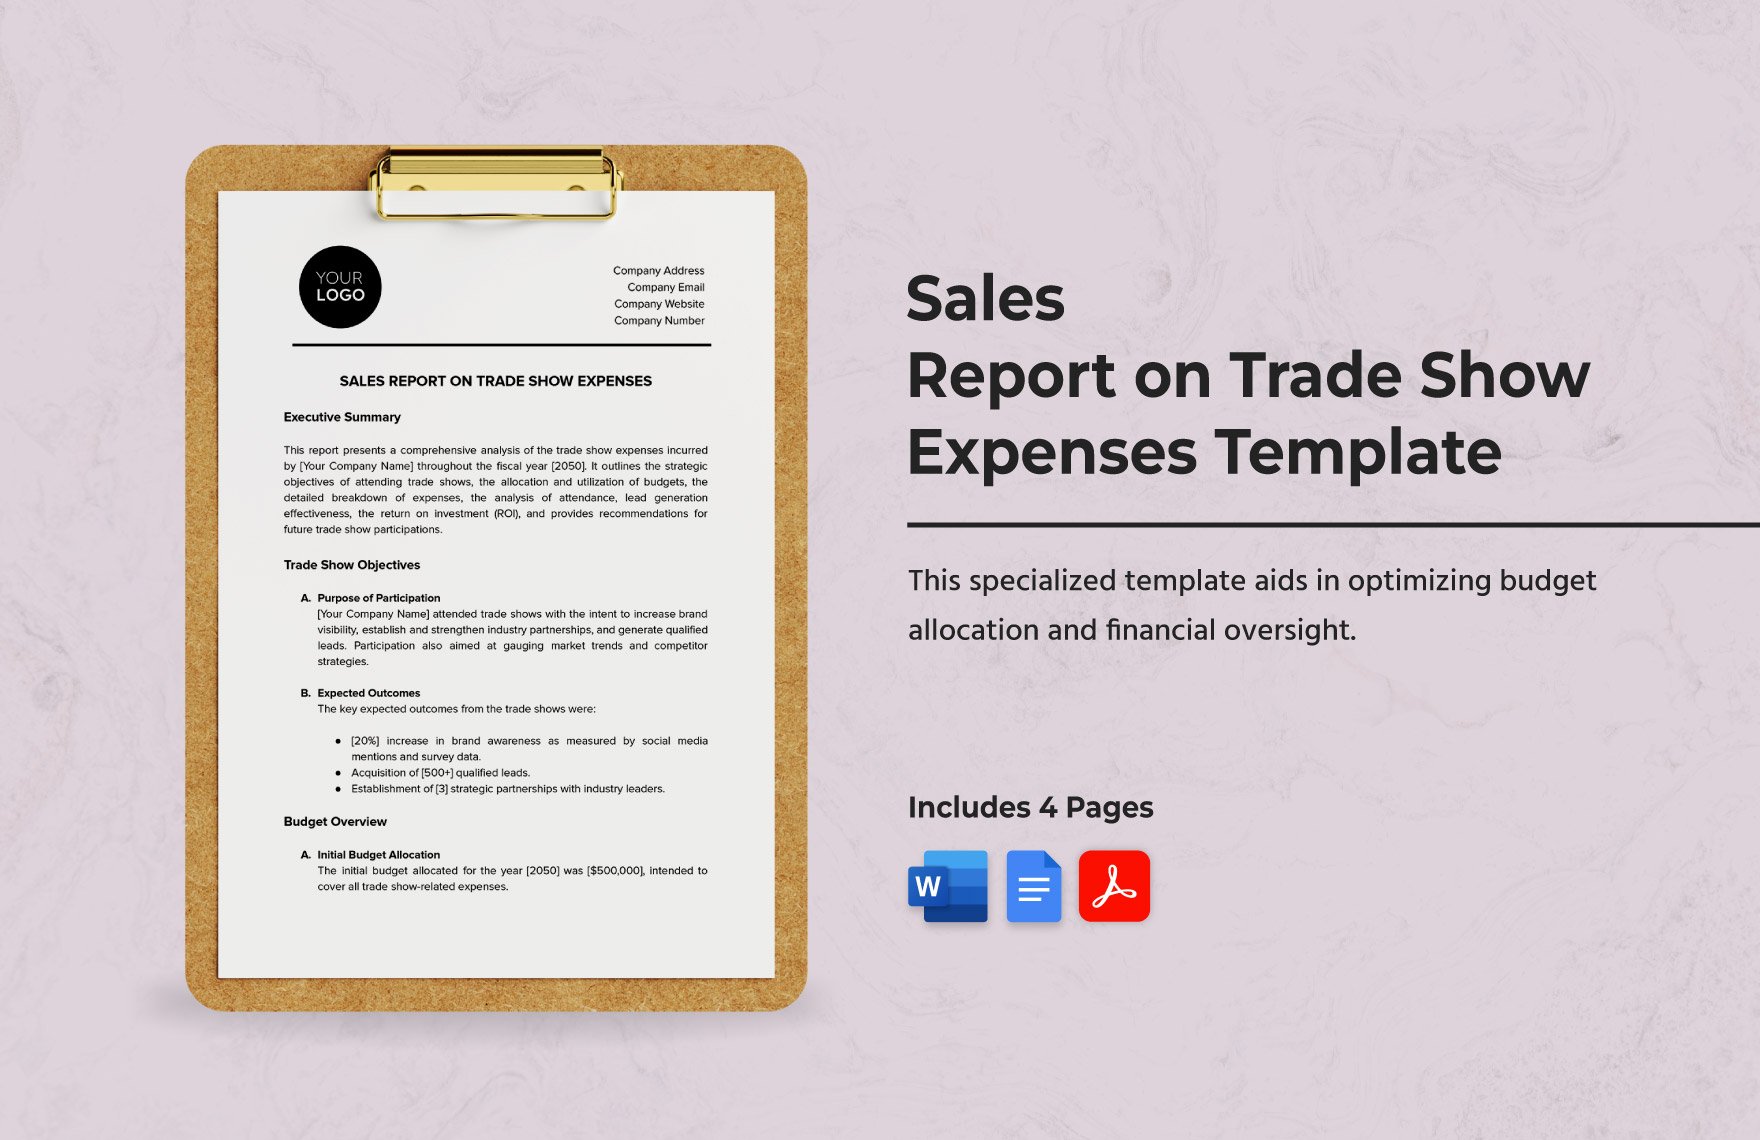 Sales Report on Trade Show Expenses Template